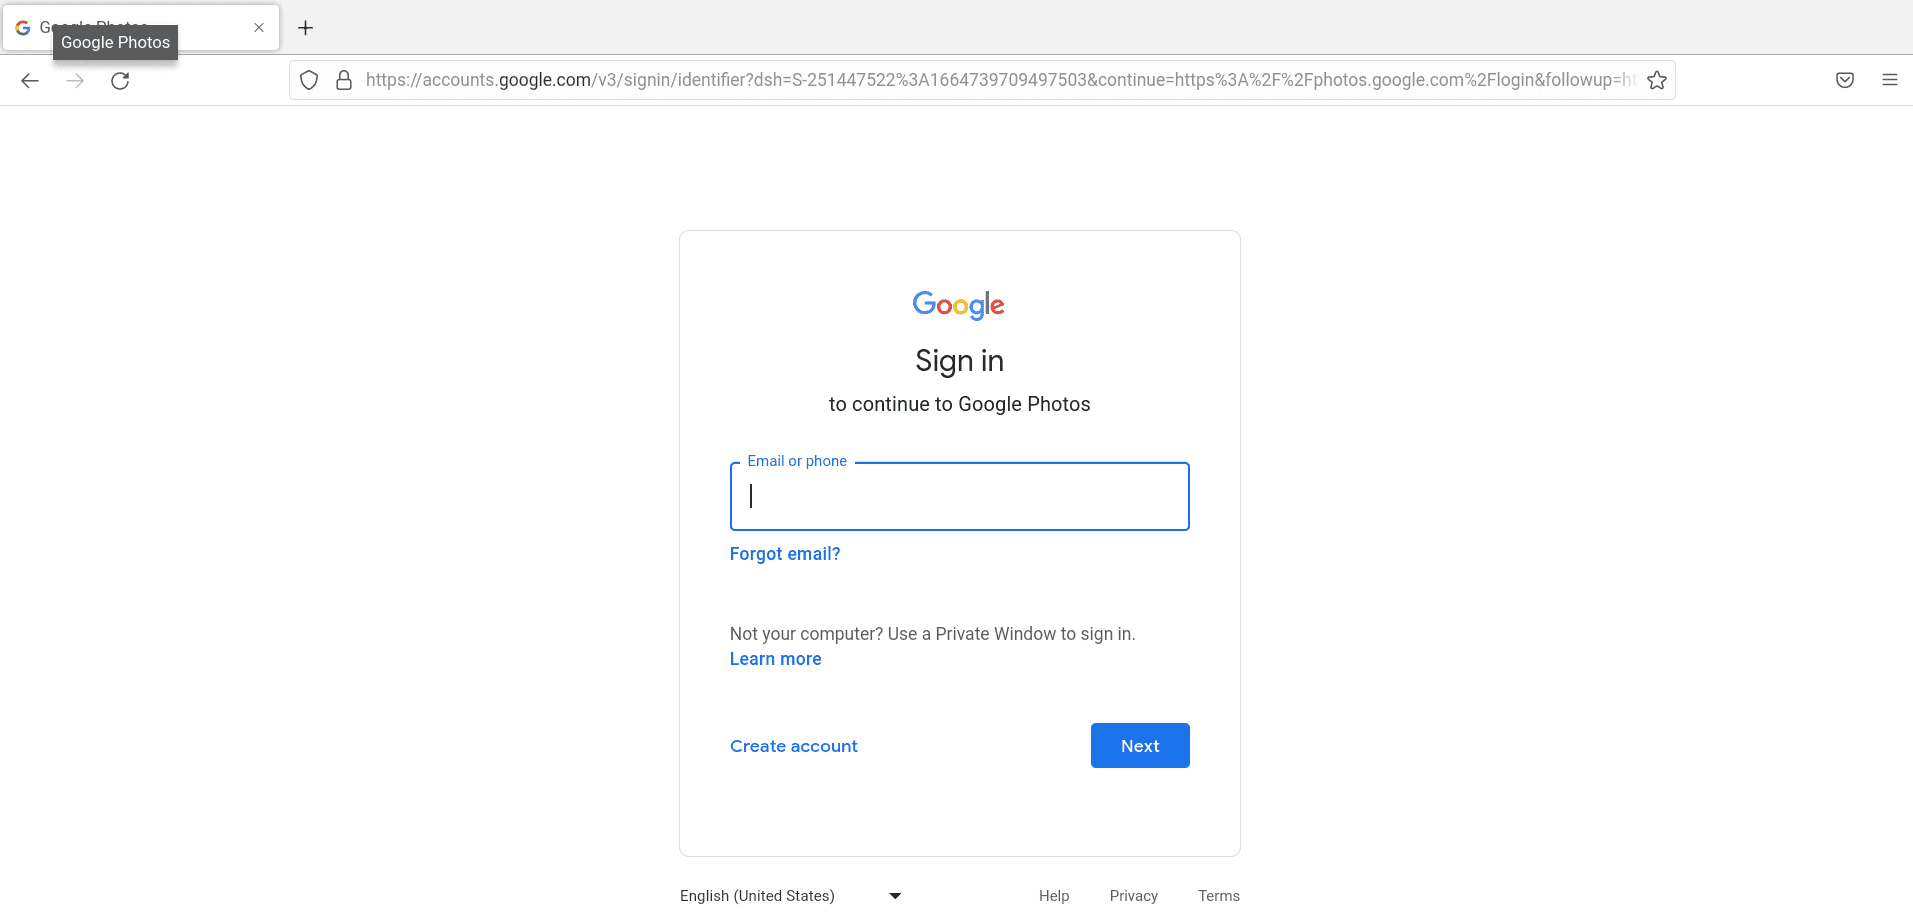 Signing in with your Google account